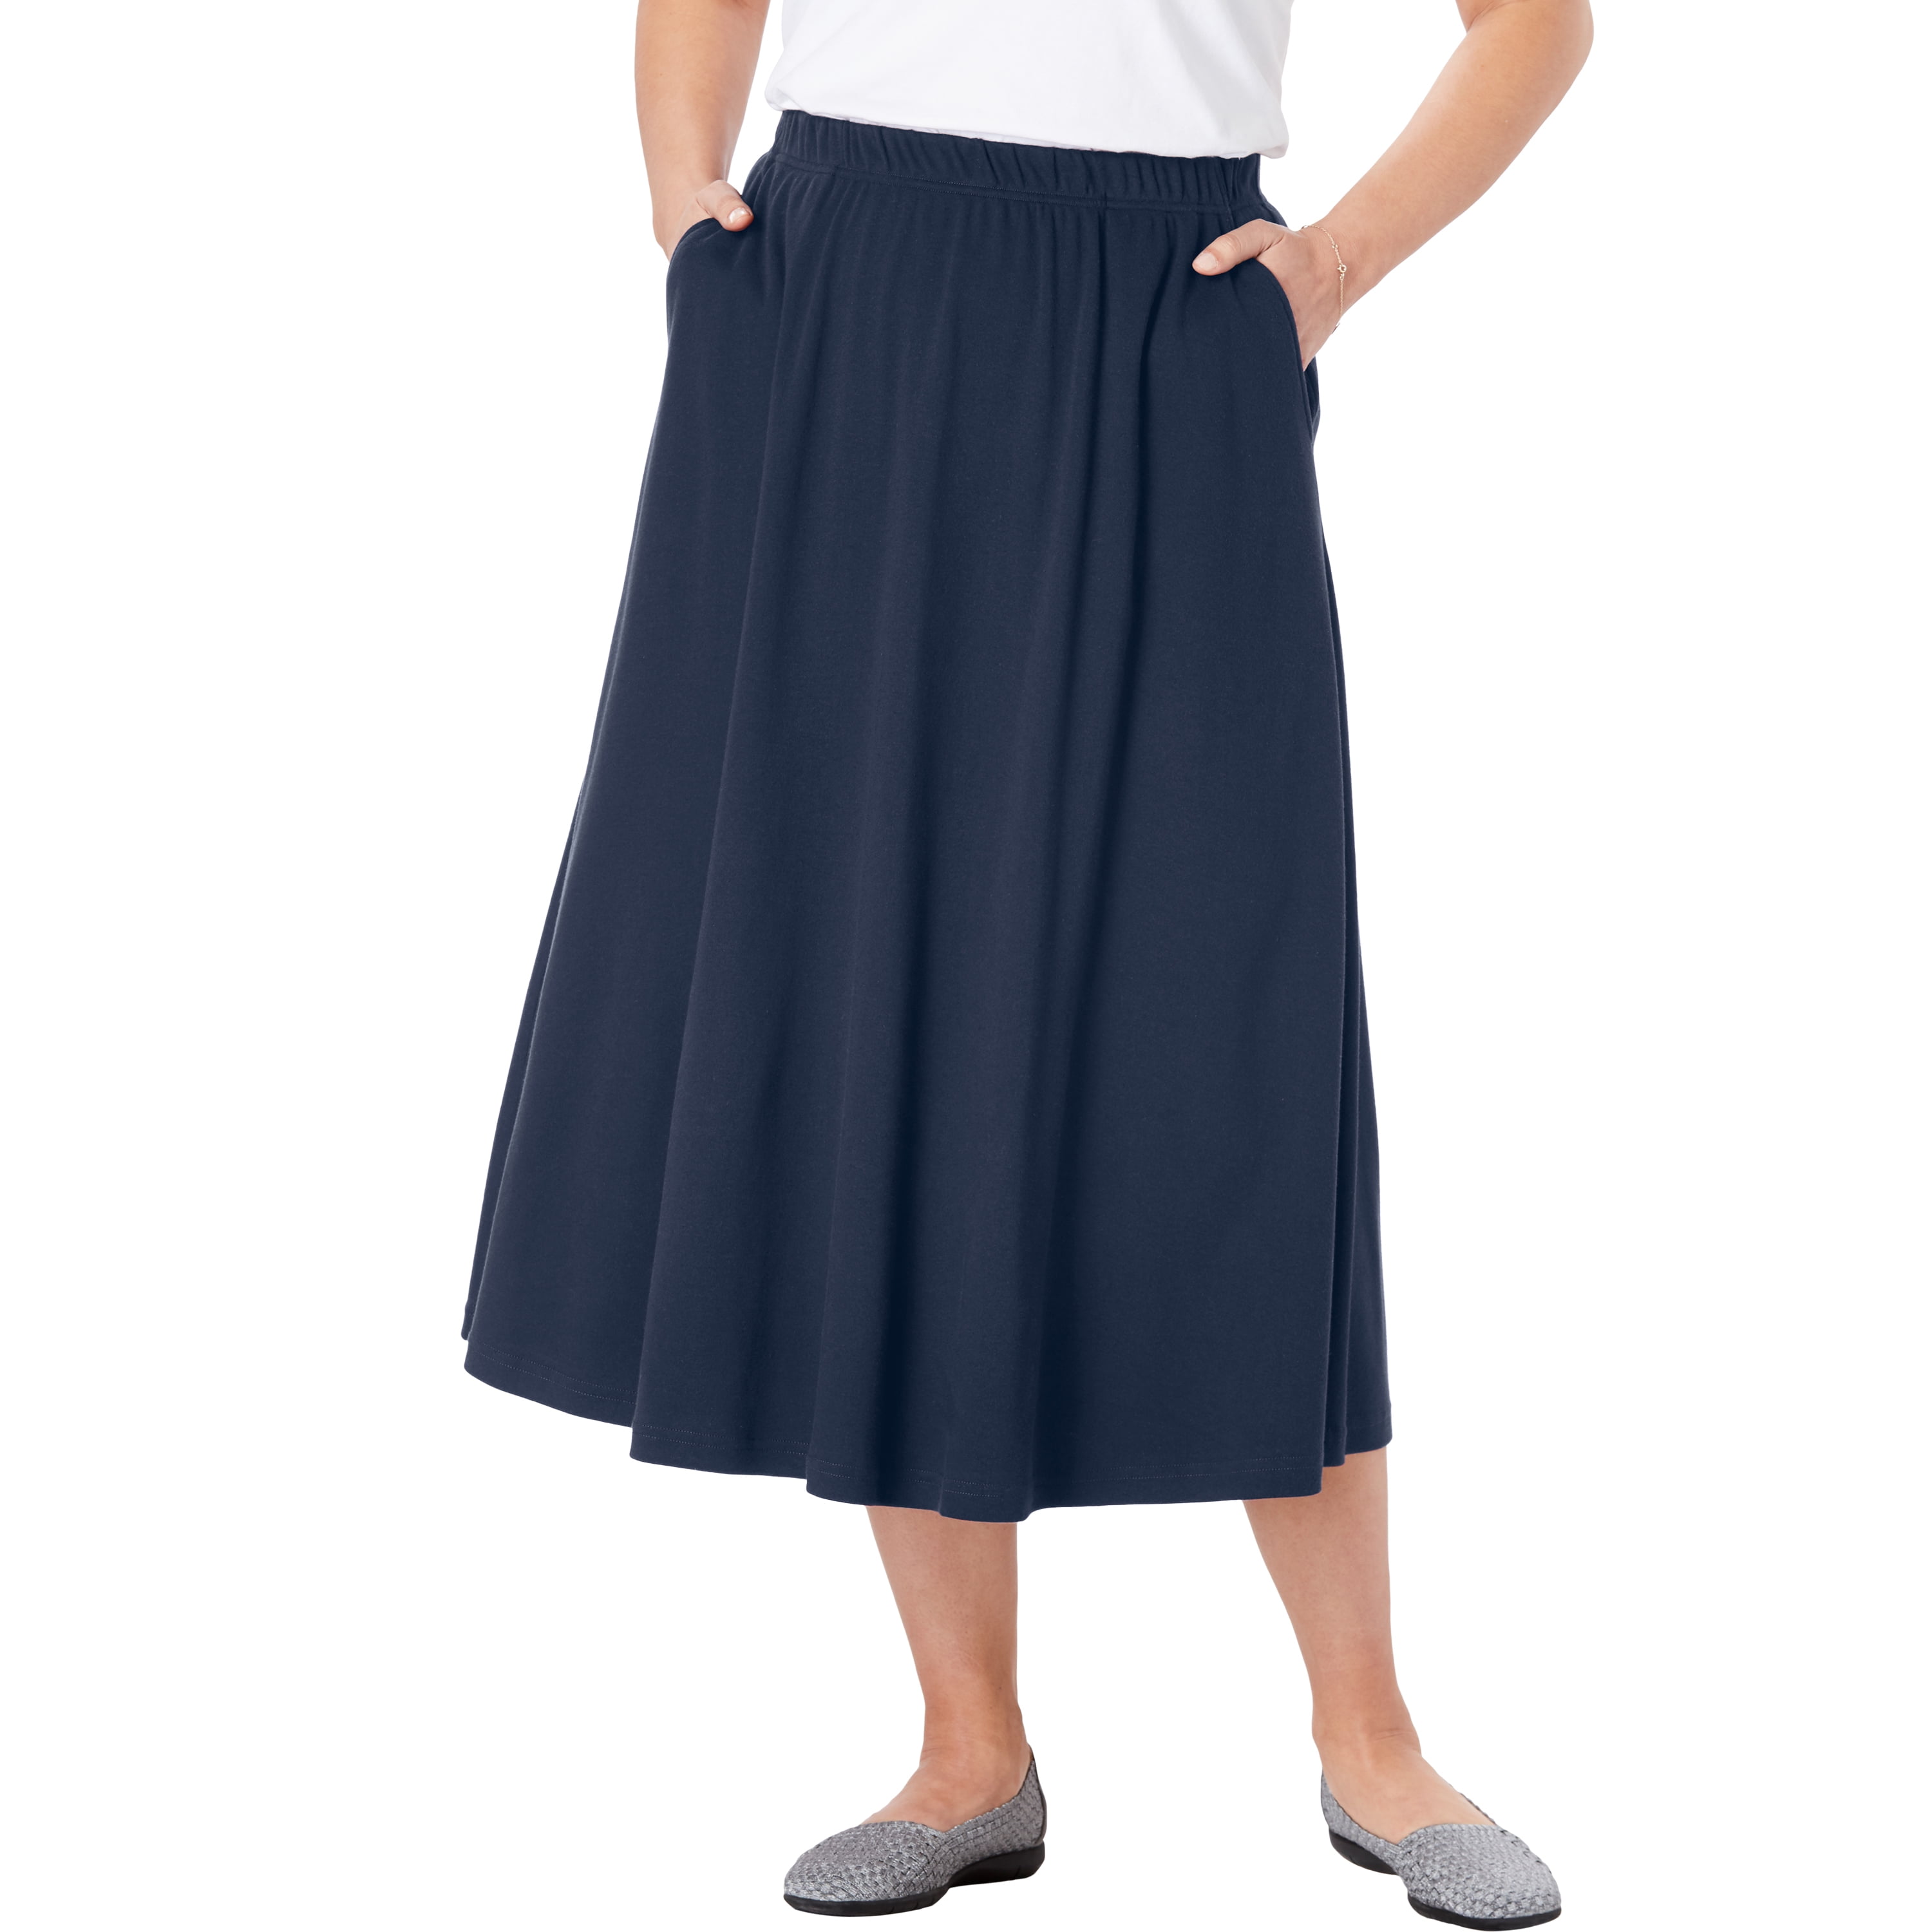 Details about   Carter's Navy  Blue Scooter Skirt 